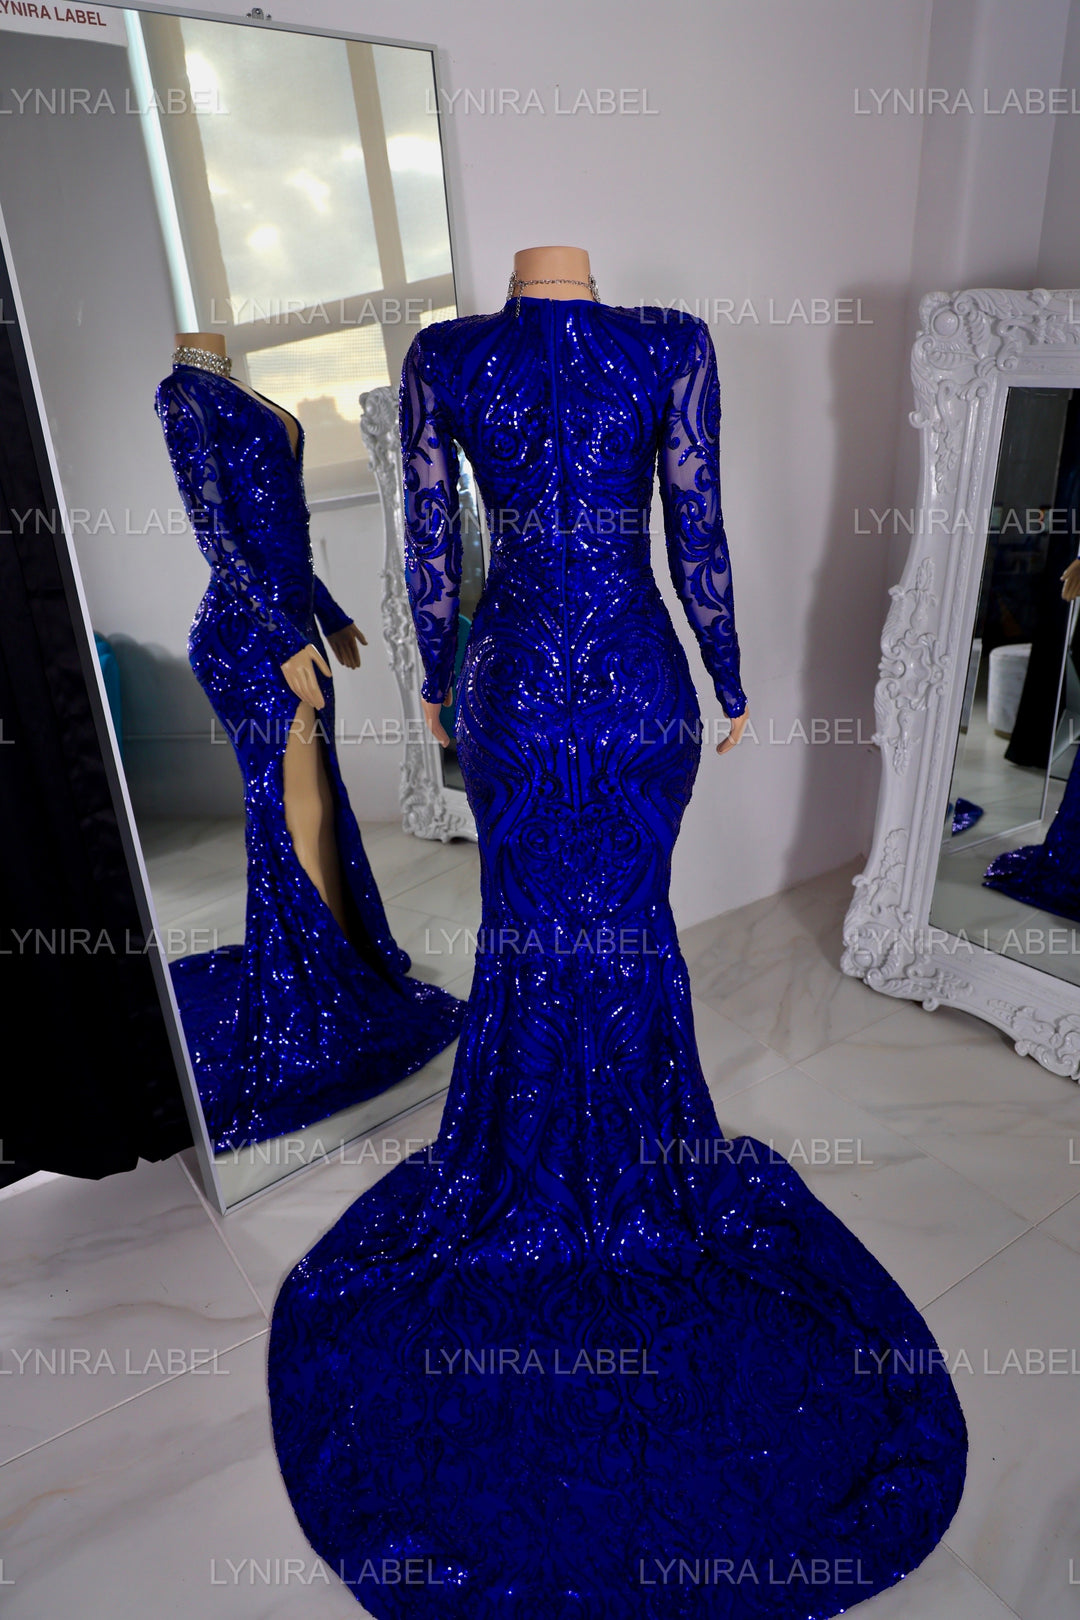 The Dorthy Sequin Gown